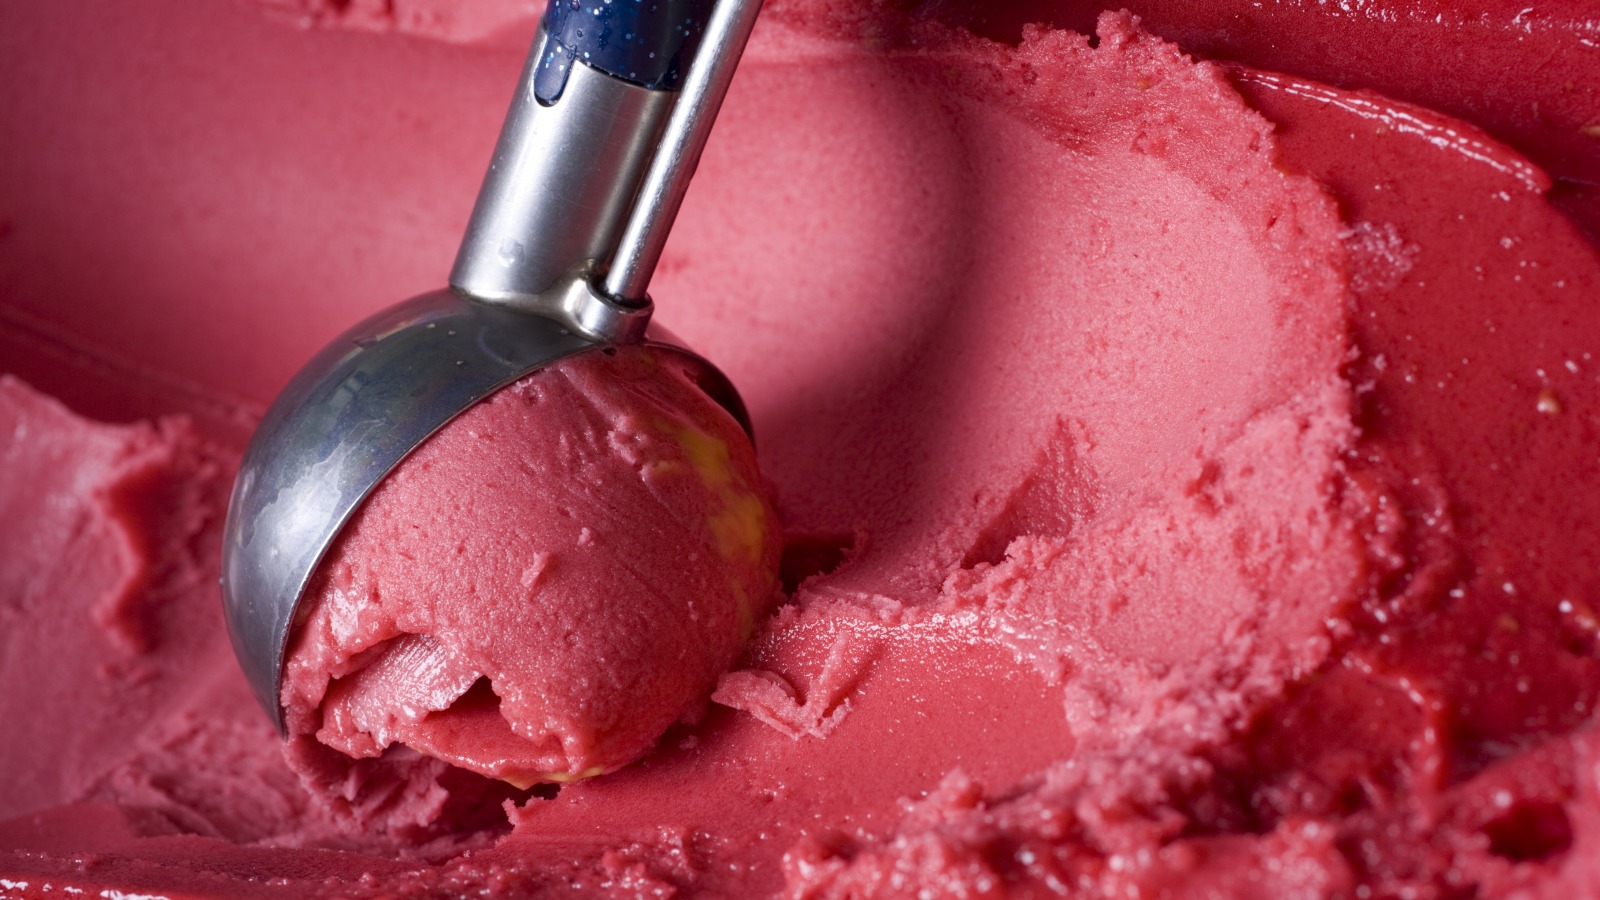 The Big Mistake You Make When Scooping Ice Cream